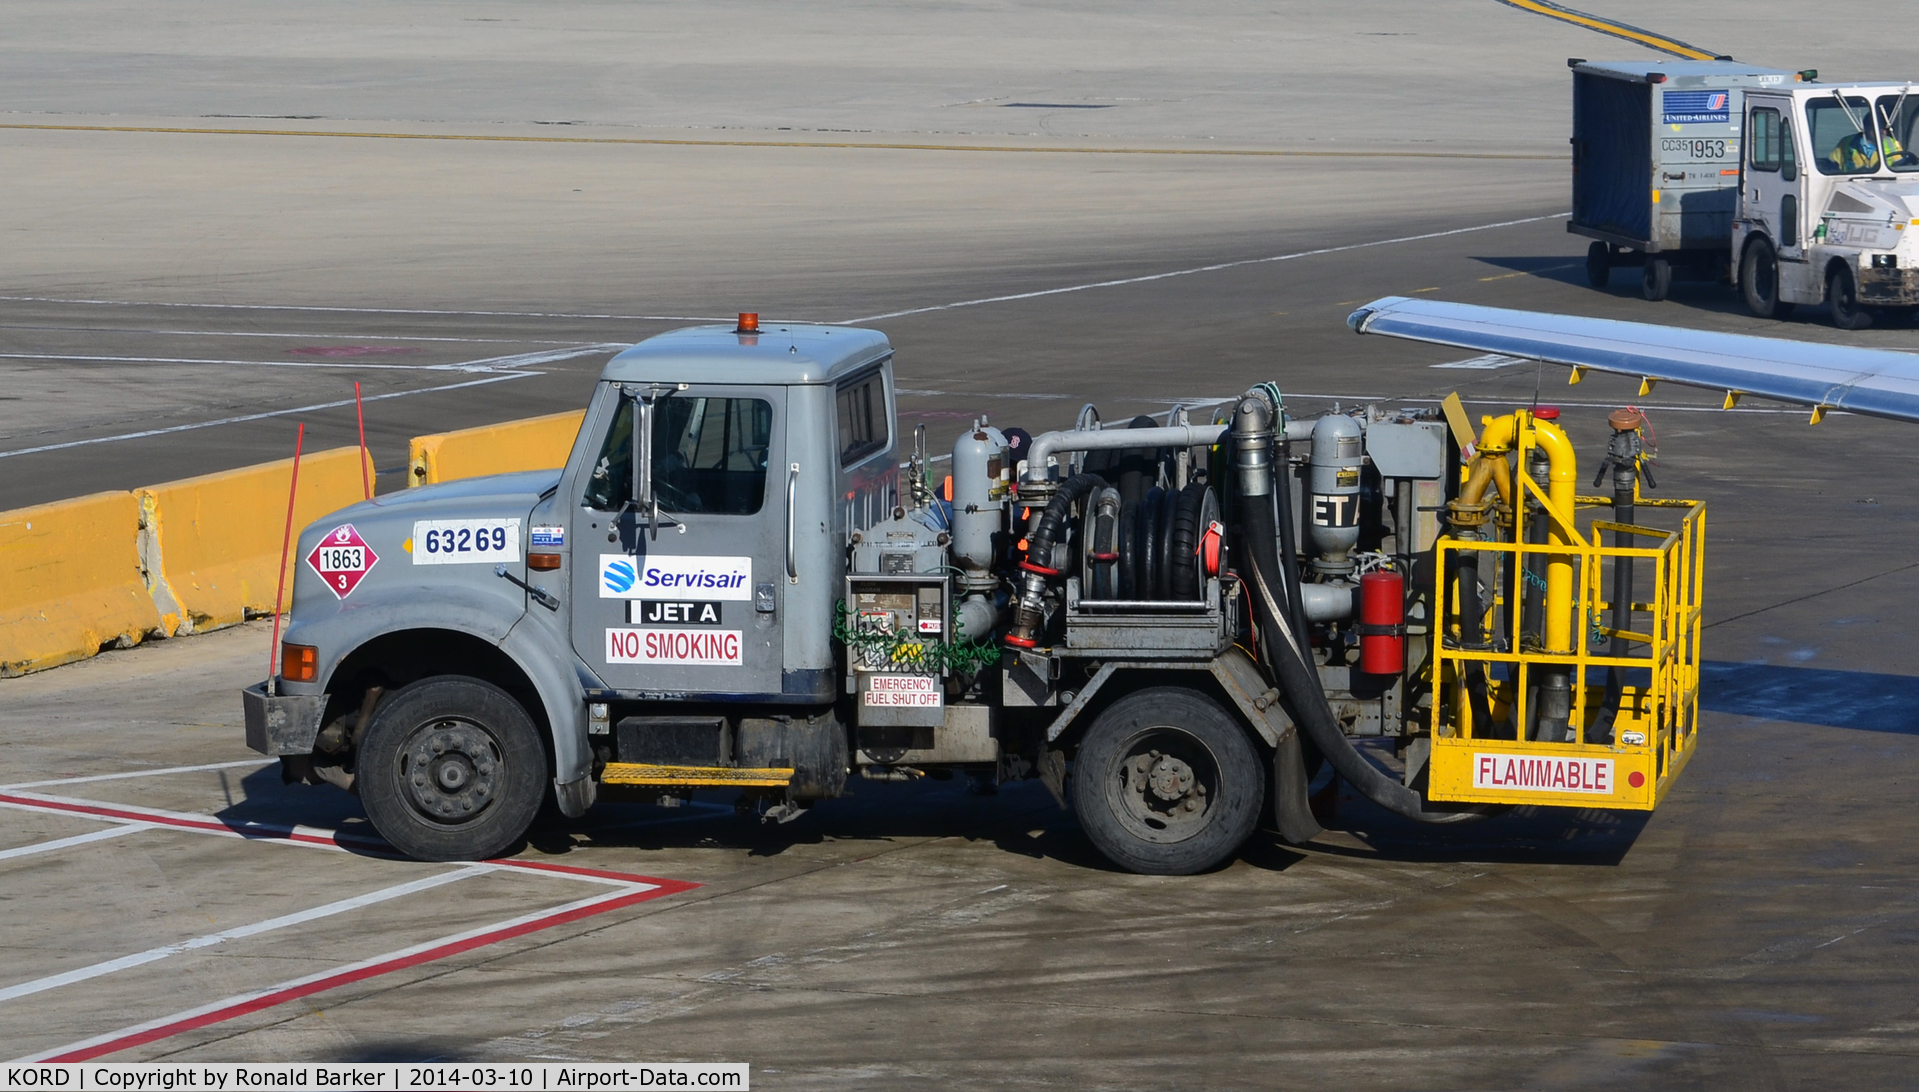 Chicago O'hare International Airport (ORD) - Fuel pump truck at O'Hare